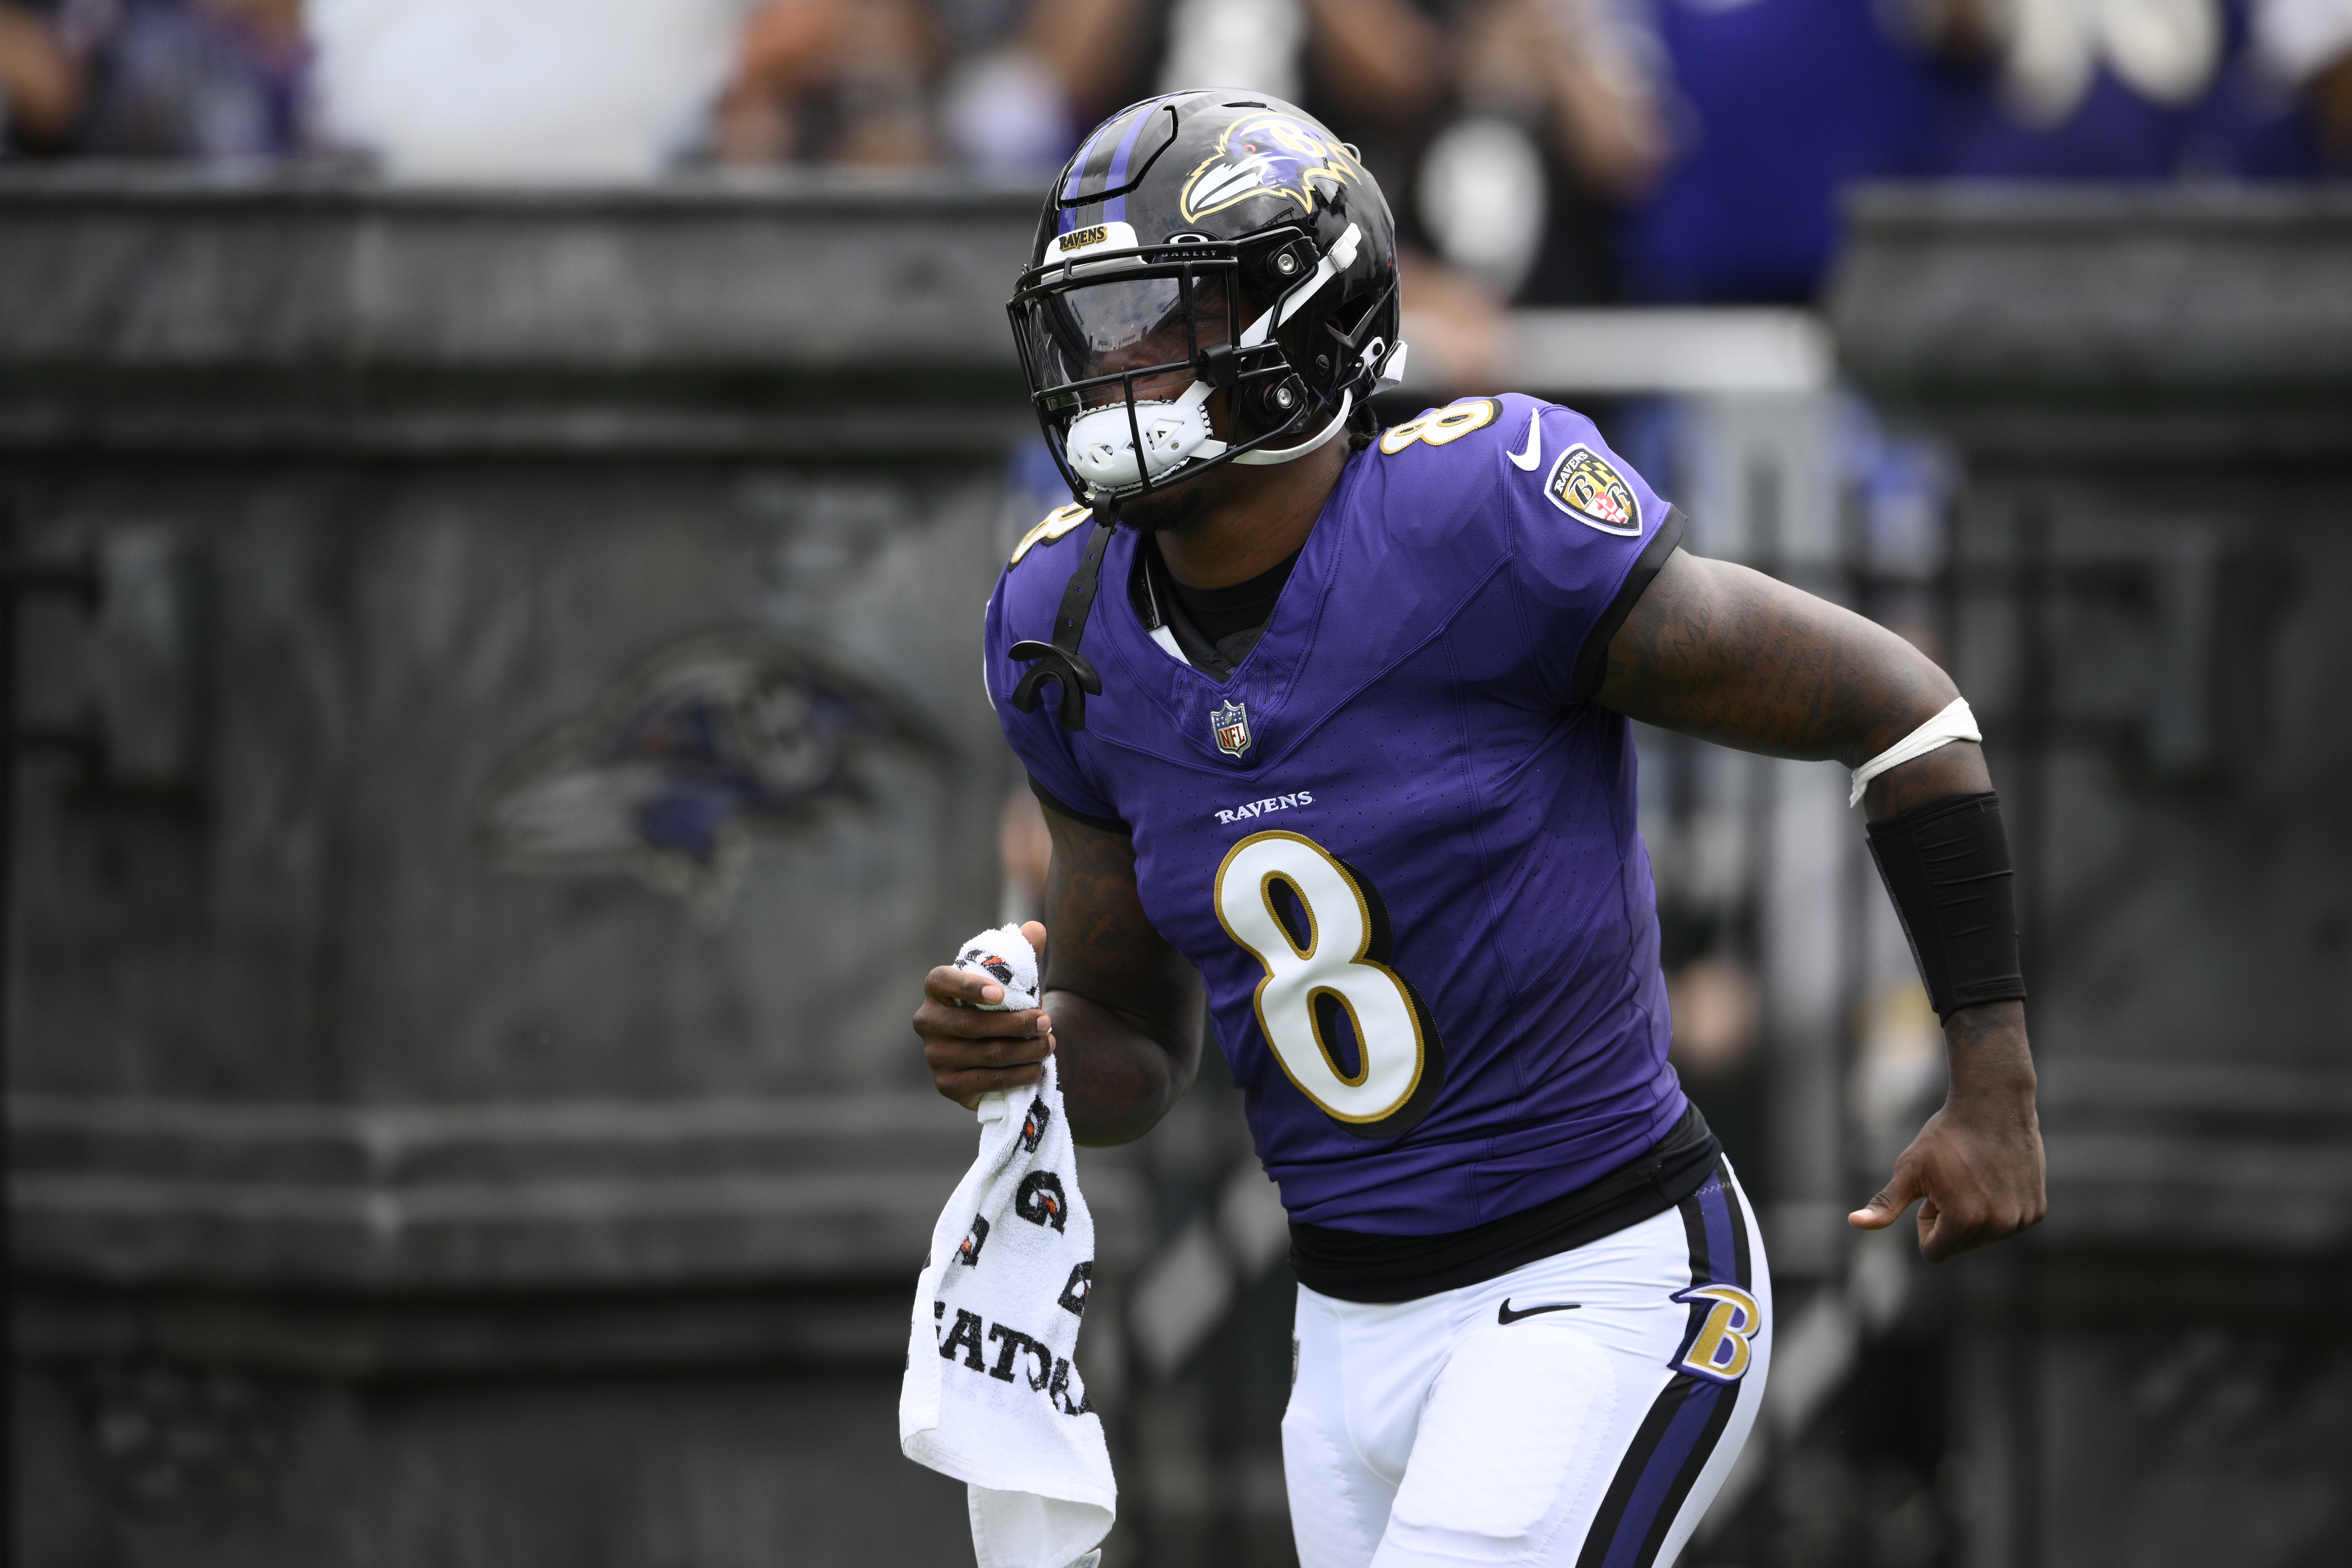 News & Notes: Lamar Jackson Is Adding More Tricks to His Bag